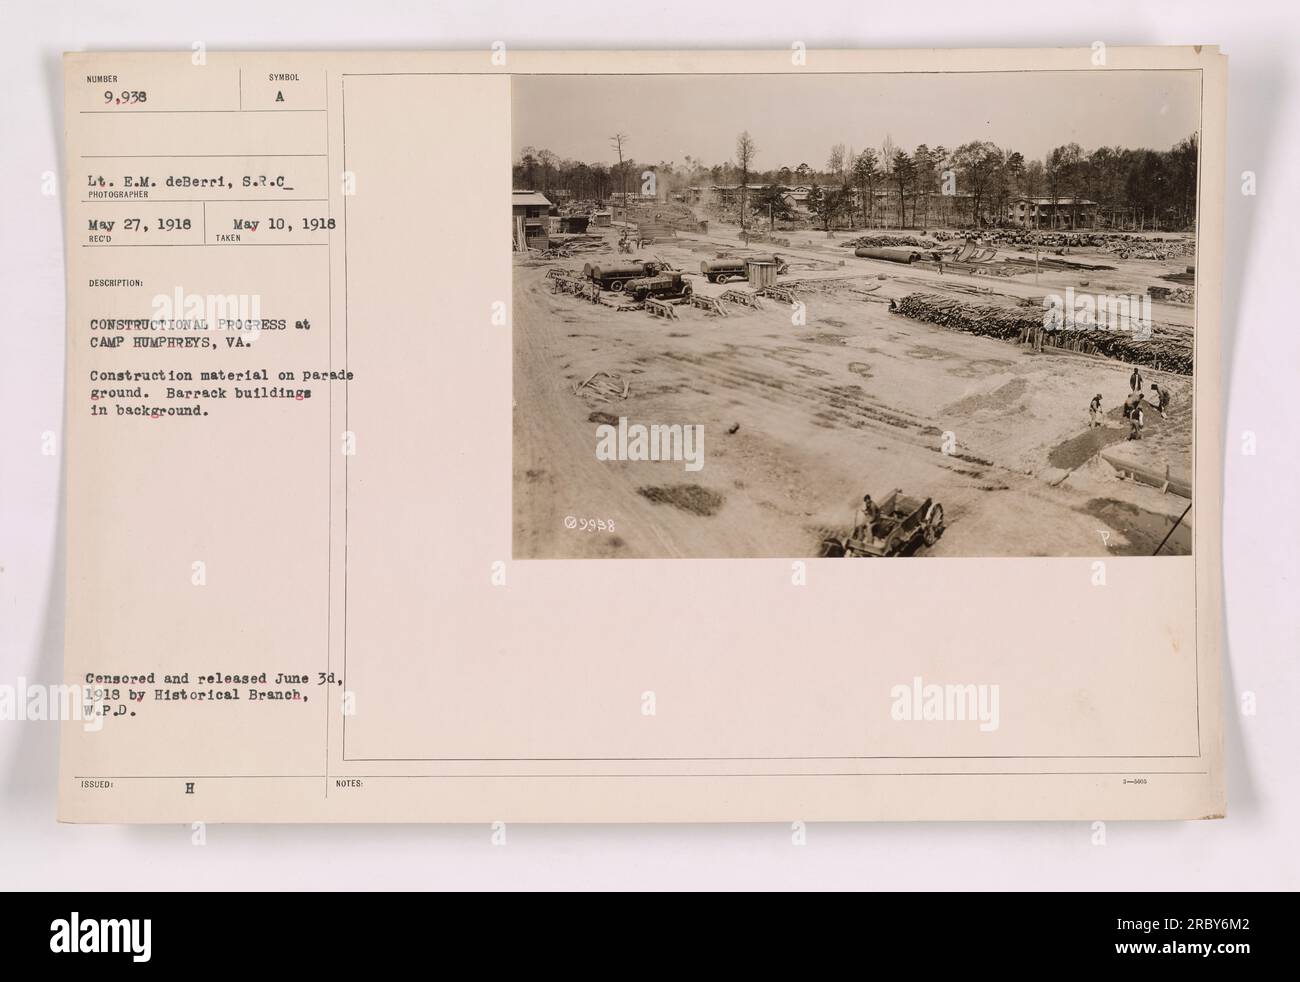 Construction materials are seen on the parade ground of Camp Humphreys, Virginia, in this photograph taken on May 27, 1918. The image shows barracks buildings in the background, highlighting the construction progress taking place at the camp during World War I. The photo was taken by Lt. E.M. deBerri and was censored and released on June 3, 1918. Stock Photo